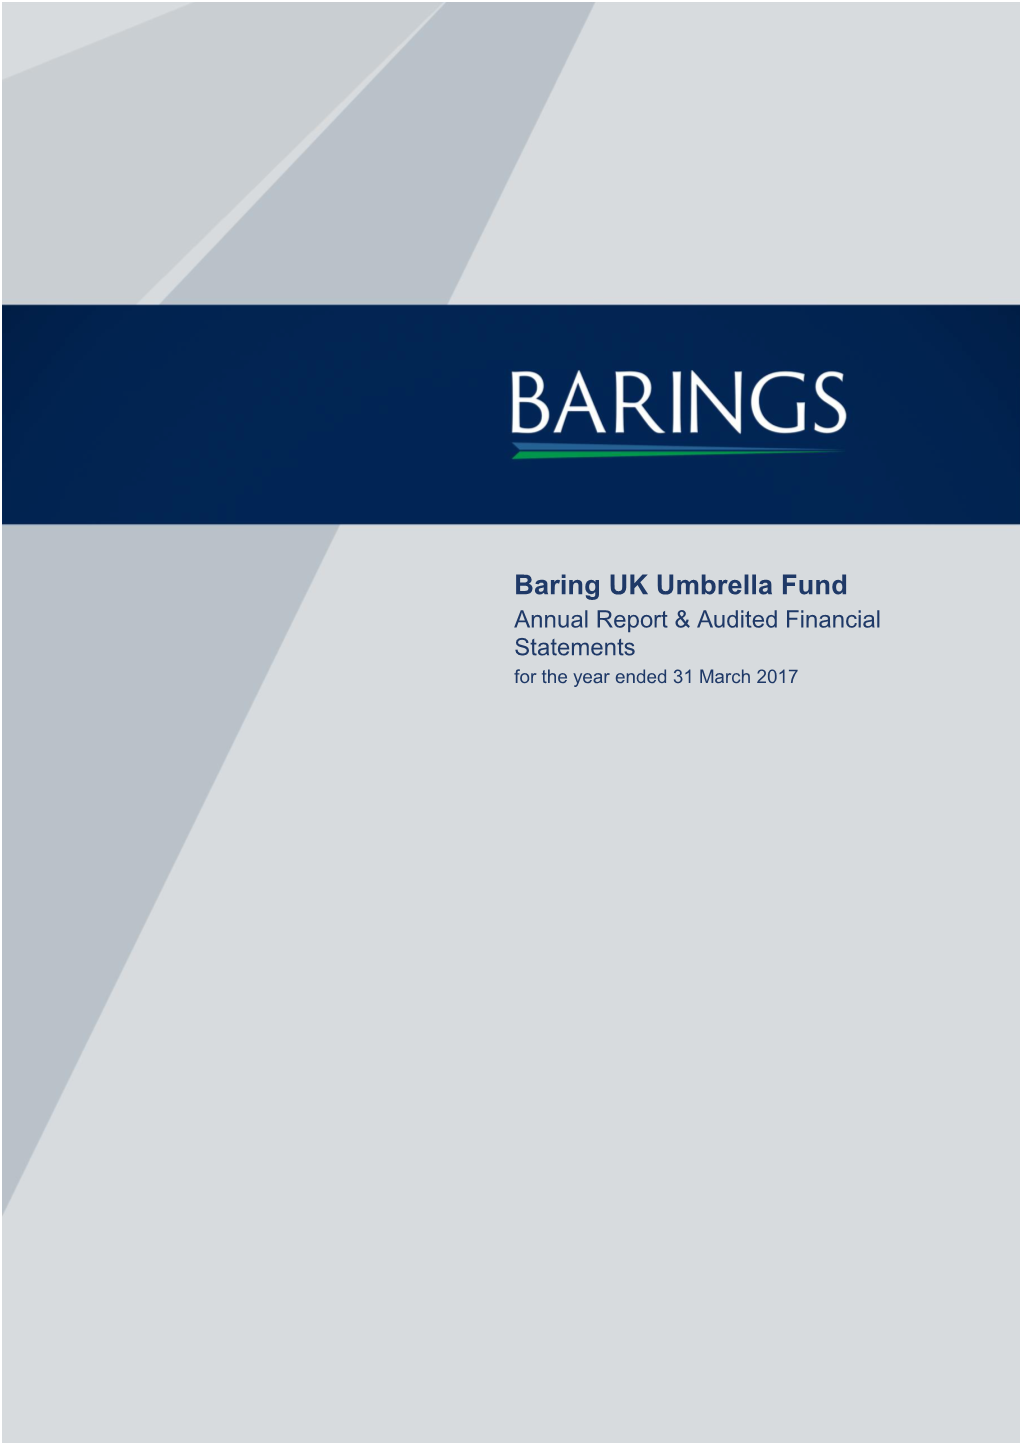 Baring UK Umbrella Fund Annual Report & Audited Financial Statements for the Year Ended 31 March 2017